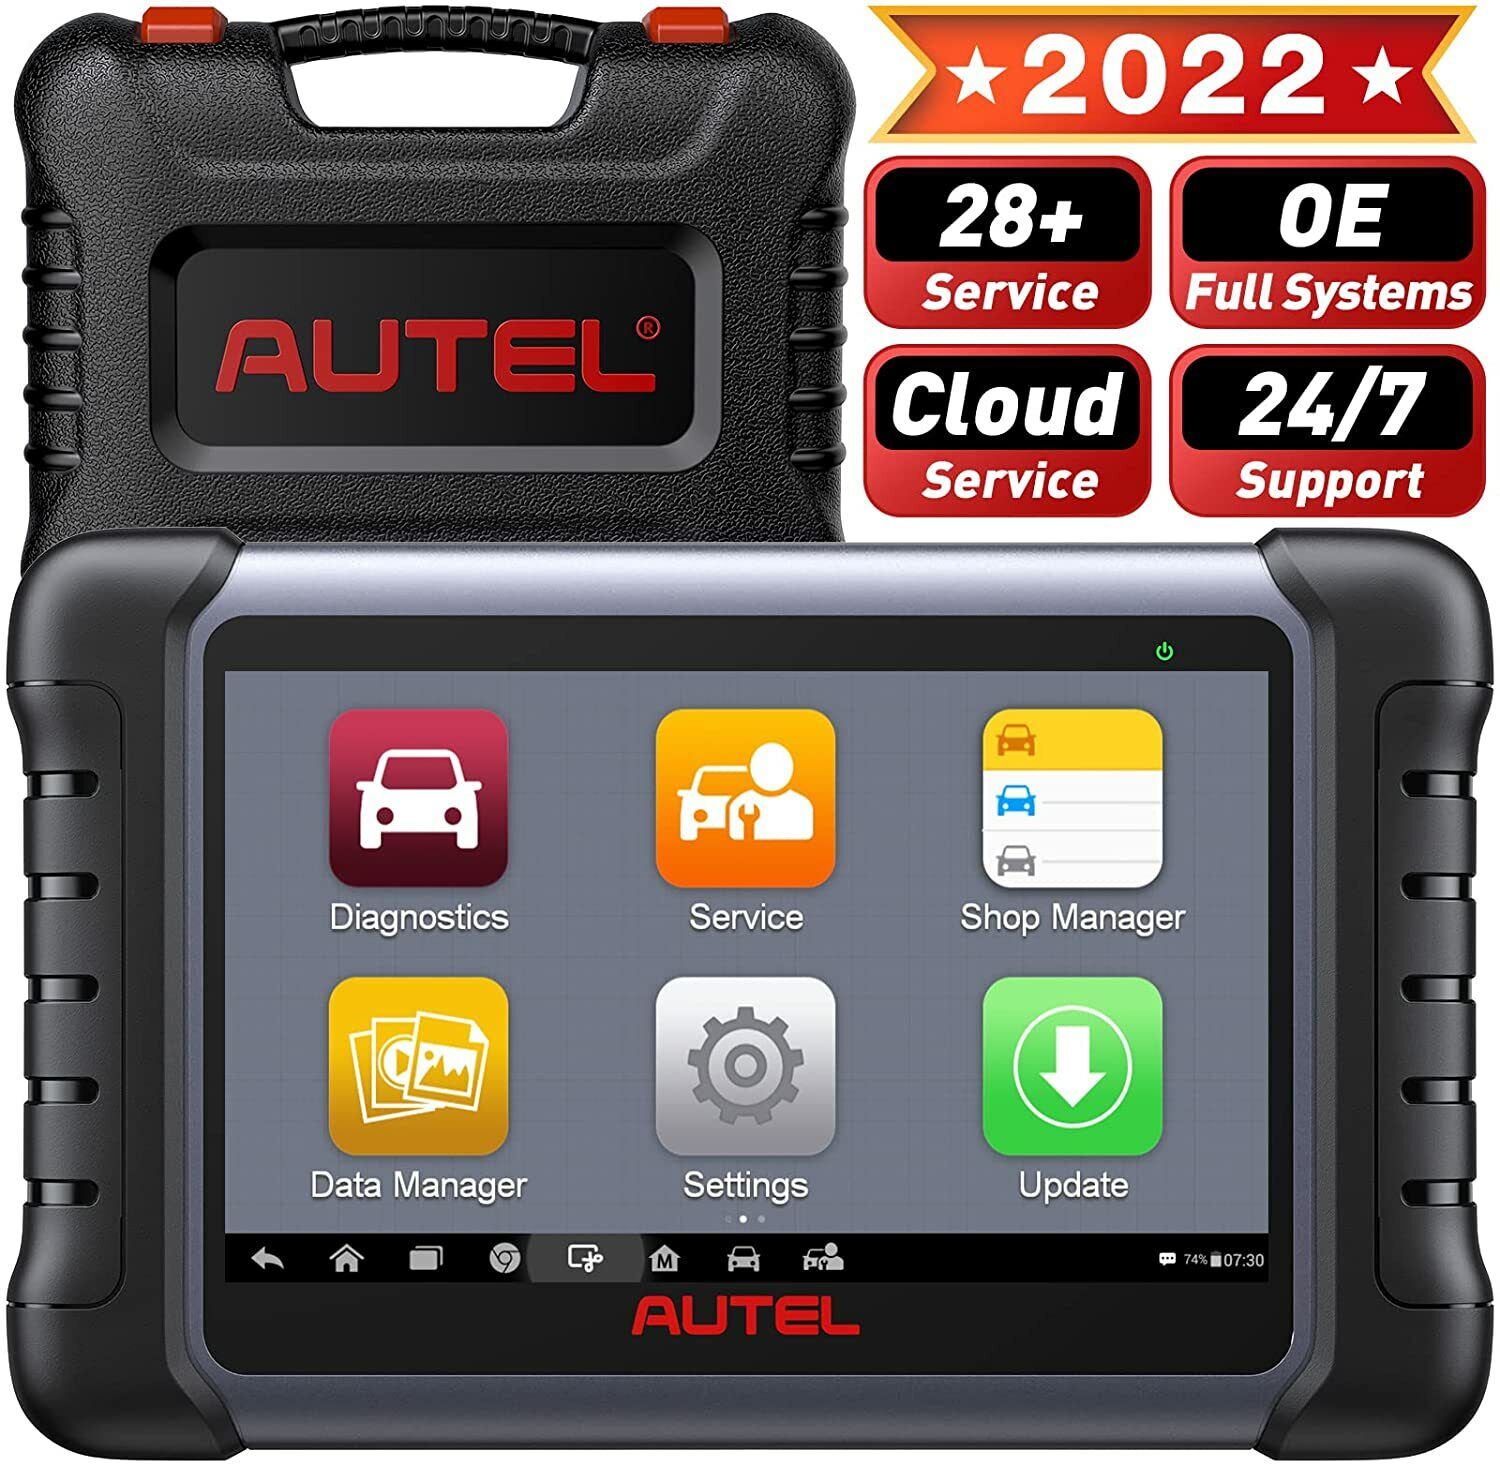 Autel MaxiCheck MX808 Full System Diagnostic Tool Newly Adds Active Test &  Battery Testing